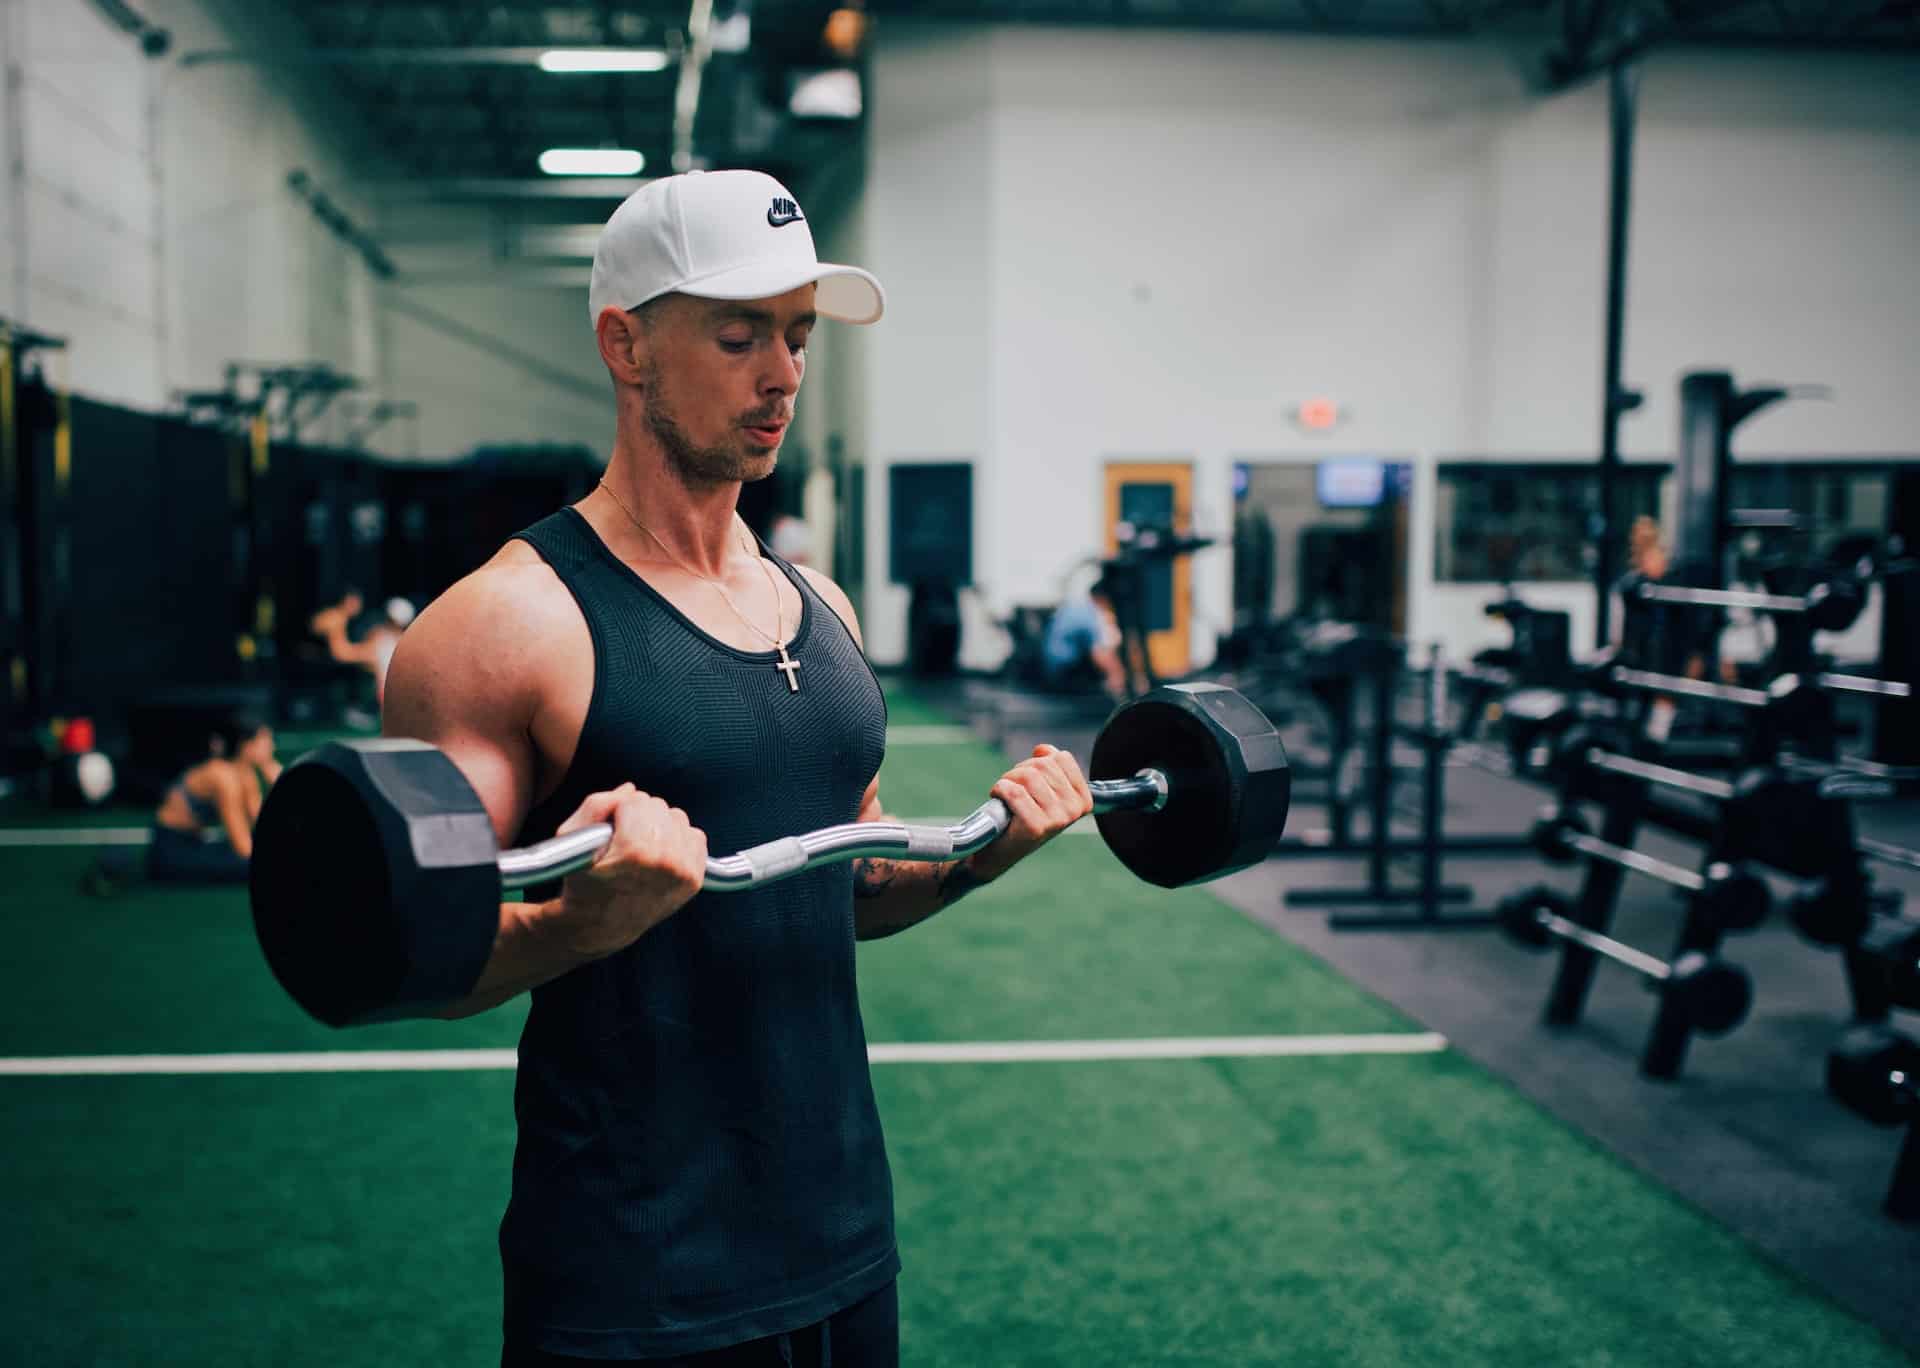 5 Best Workout Hats: Gym Hats to Crush Your Workout